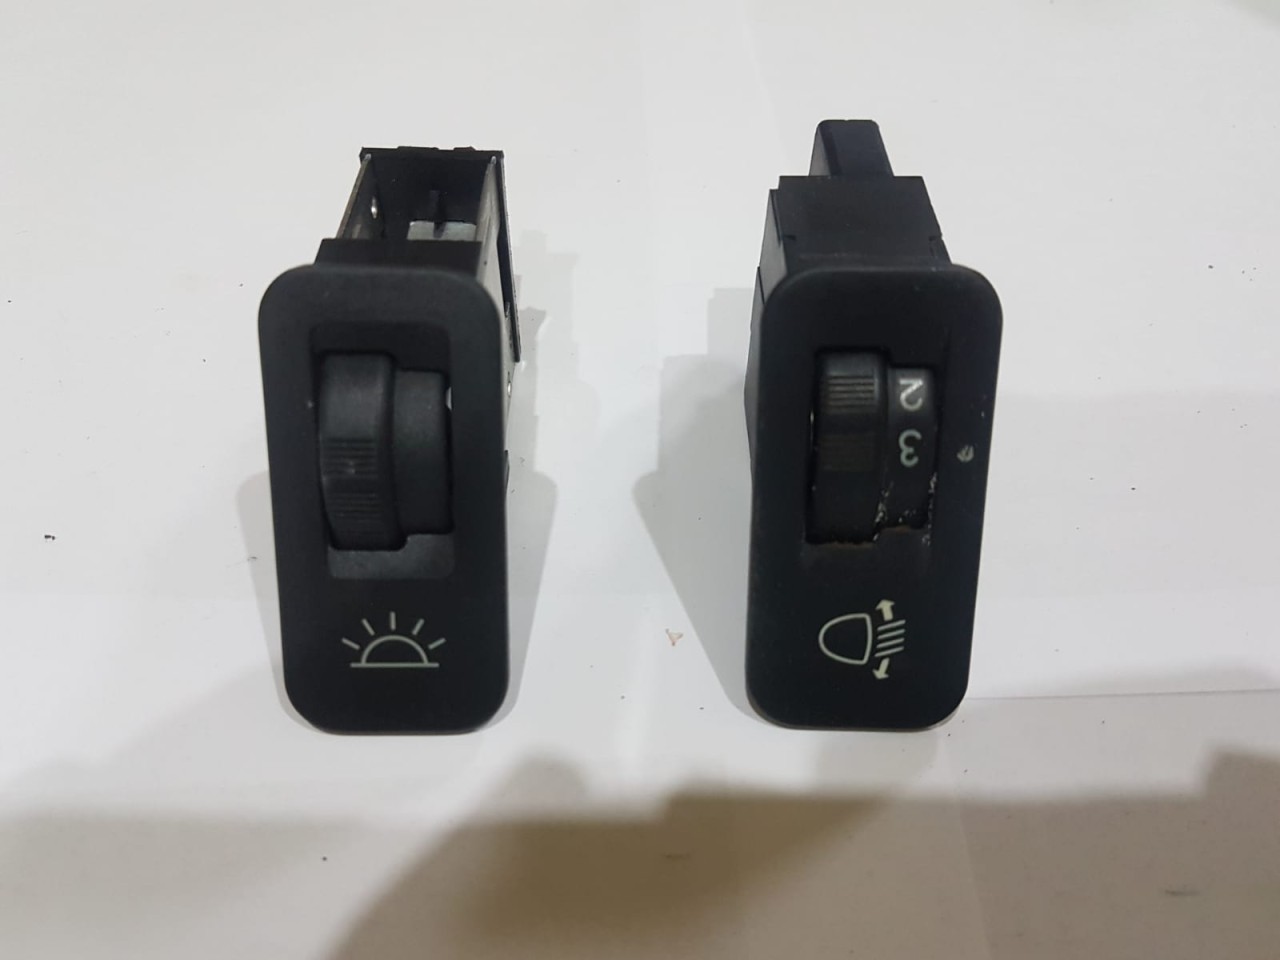 Vand piese si accesorii PEUGEOT 206 HATCHBACK  2 USI, AUTO PERSONAL,2.0HDI,RHY90